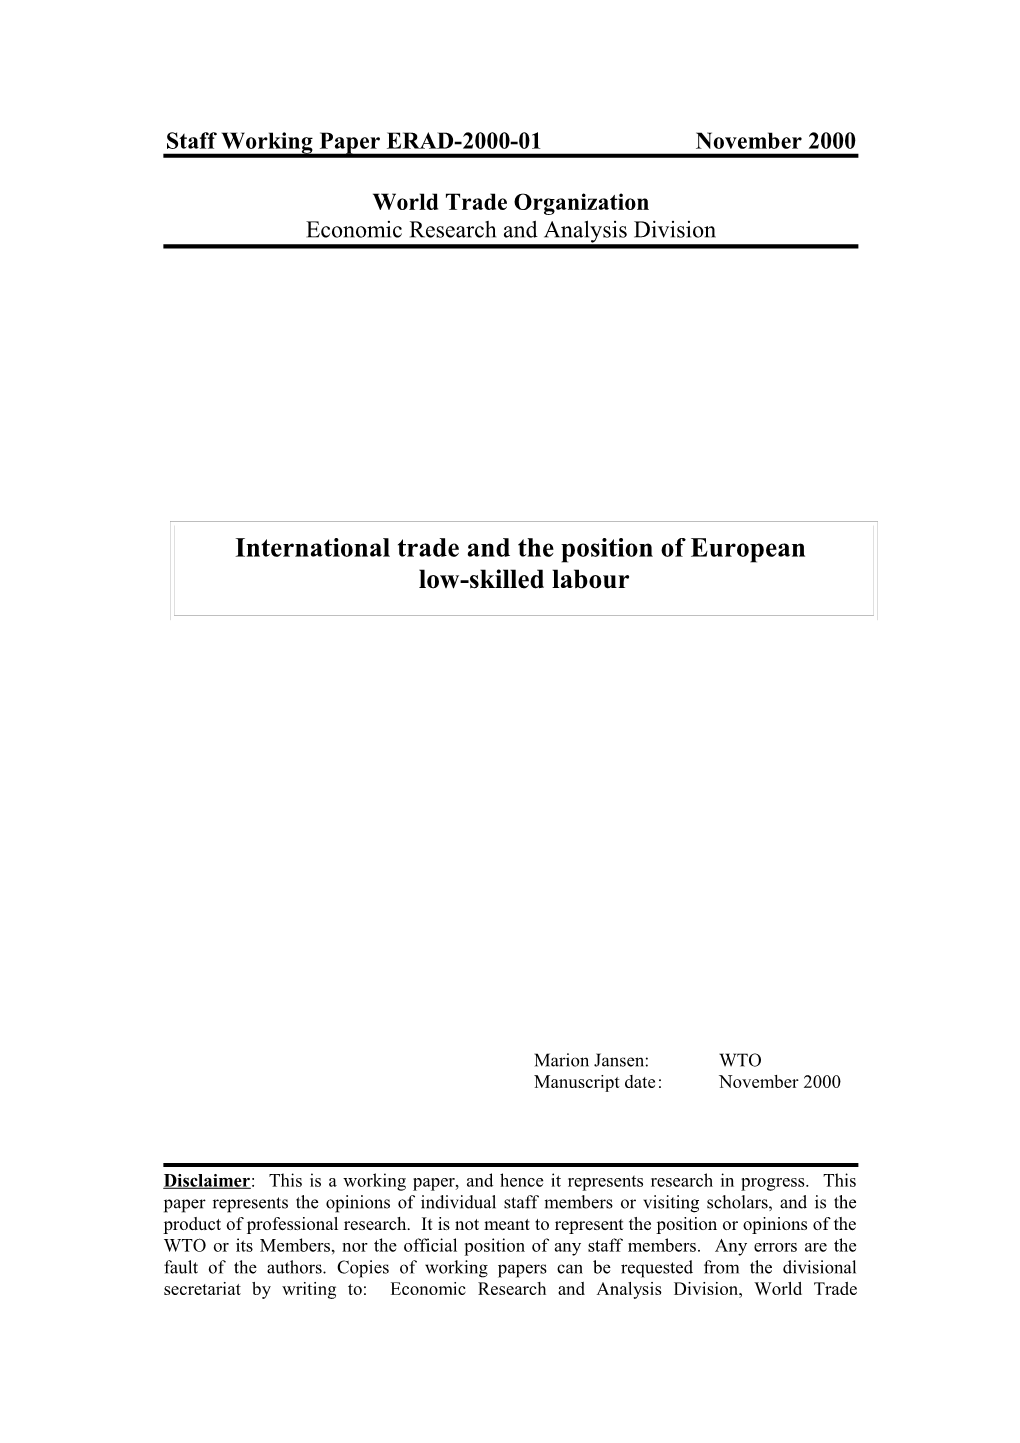 Globalisation and the Position of European Low-Skilled Labour